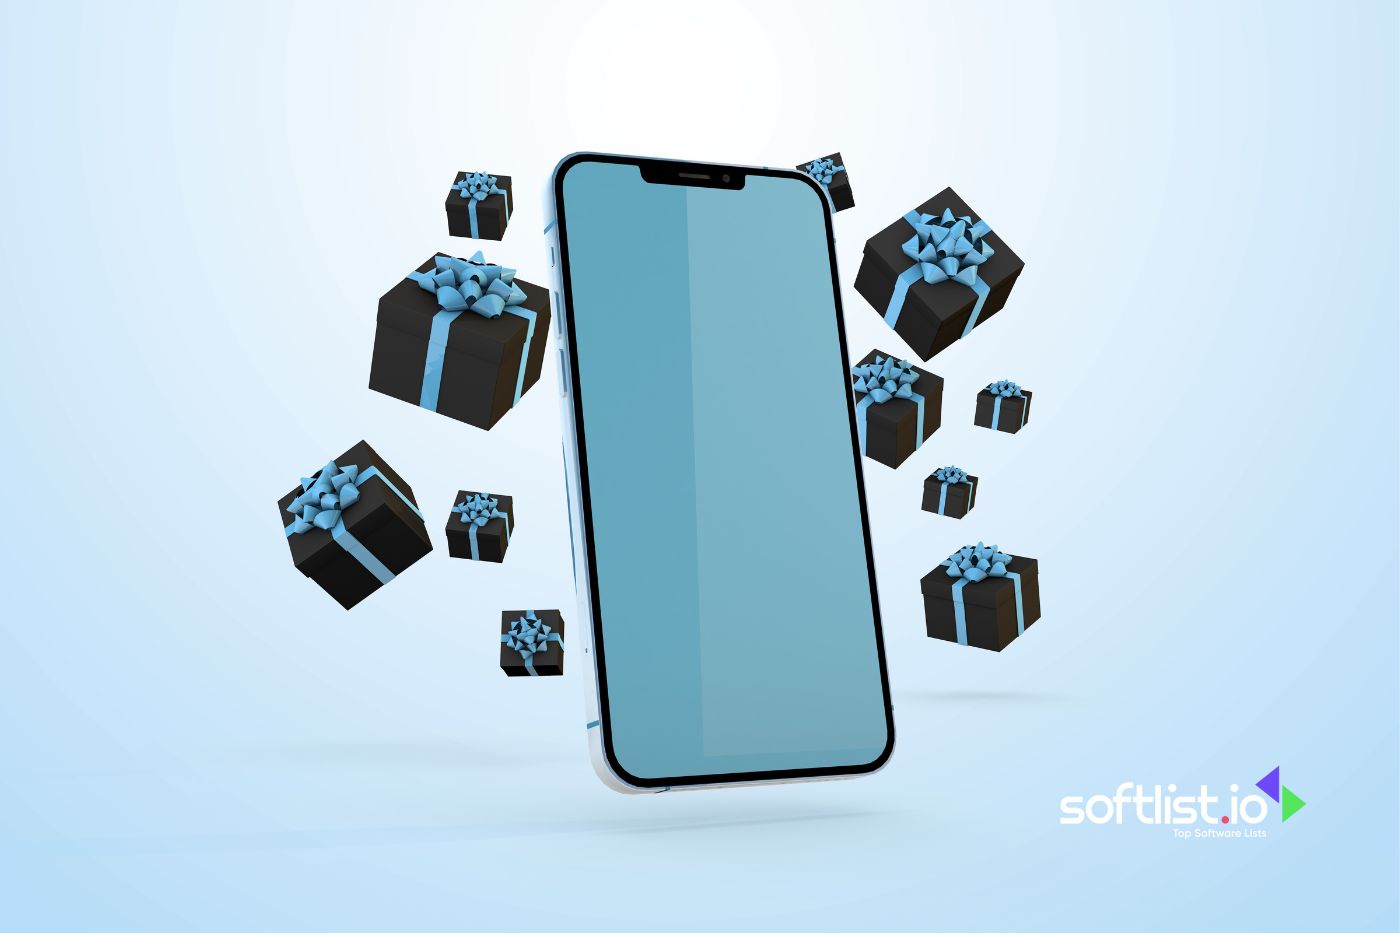 Smartphone surrounded by floating gift boxes